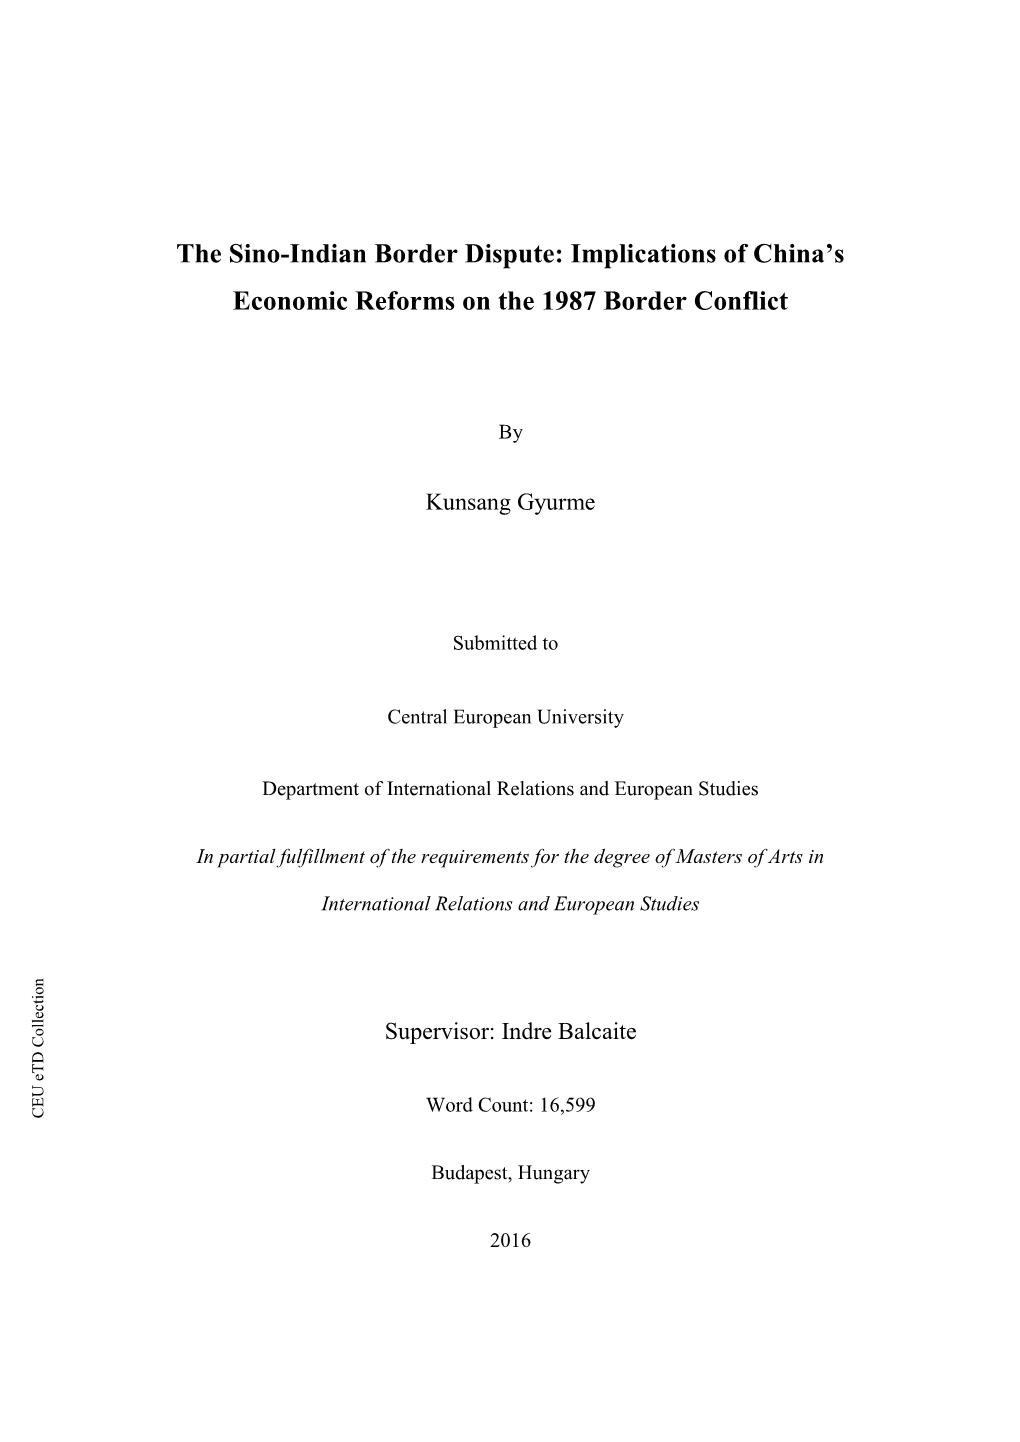 The Sino-Indian Border Dispute: Implications of China's Economic